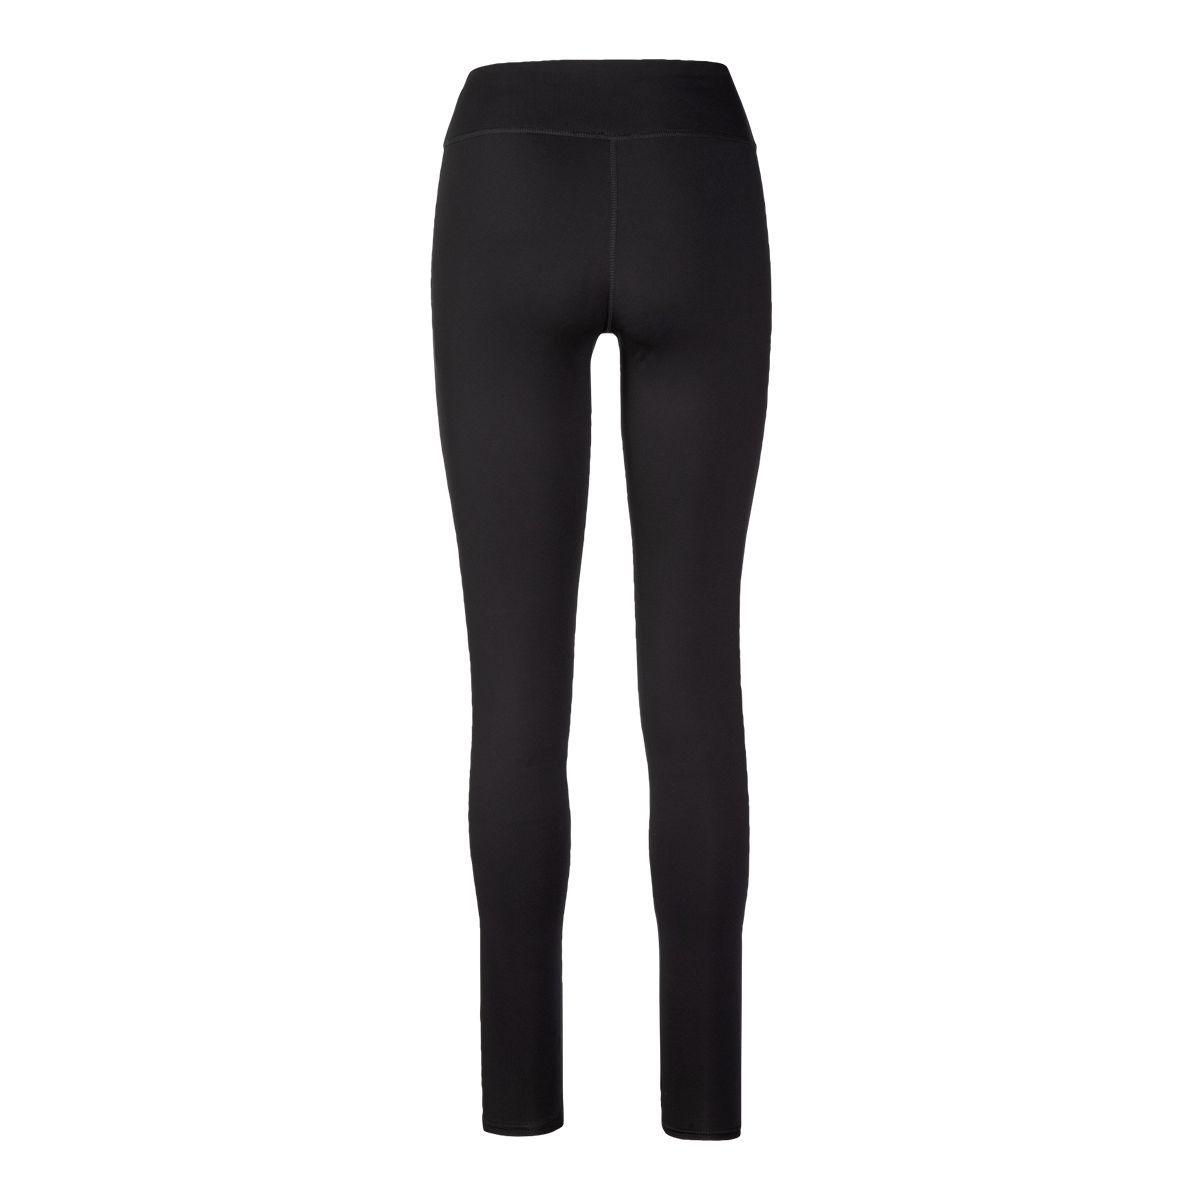 https://media-www.atmosphere.ca/product/div-03-softgoods/dpt-70-athletic-clothing/sdpt-02-womens/333365948/ea-mizuno-full-length-tight-black-s--7fc9a708-90d6-4bbc-bf49-36d3d976cb5d-jpgrendition.jpg?imdensity=1&imwidth=1244&impolicy=mZoom